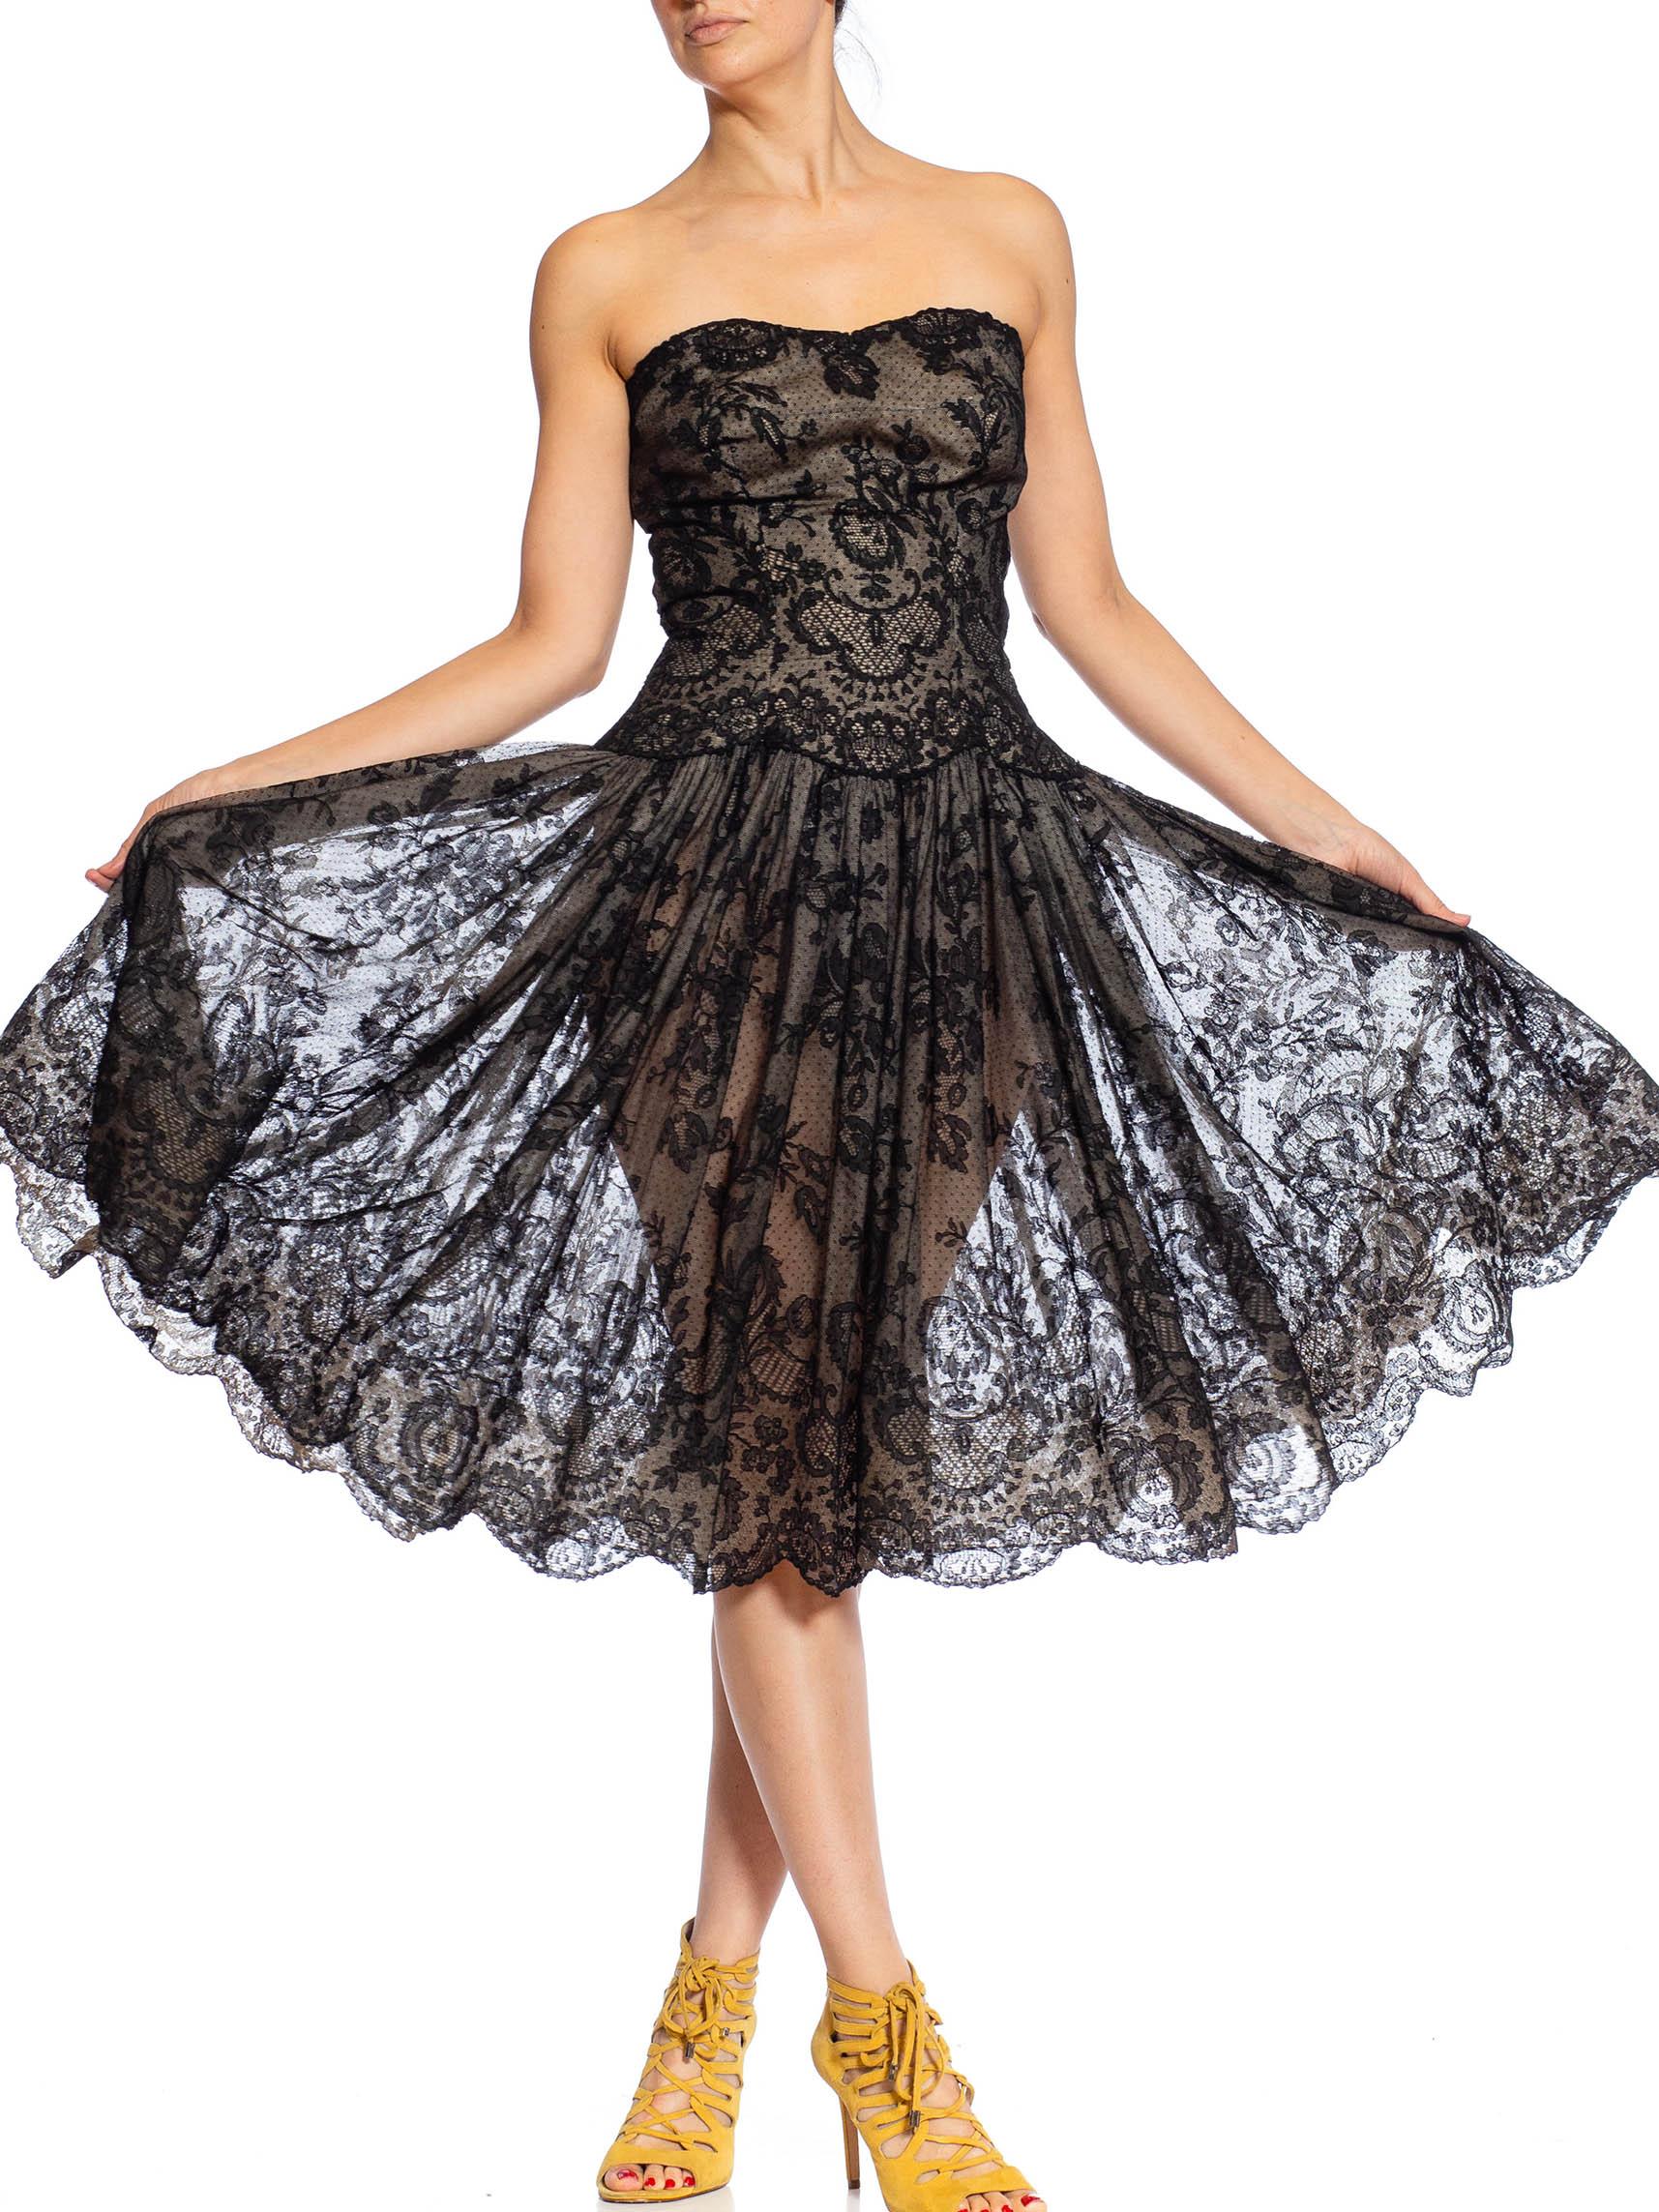 Women's 1950S Black Floral Lace Strapless Fit & Flare Cocktail Dress From Paris For Sale